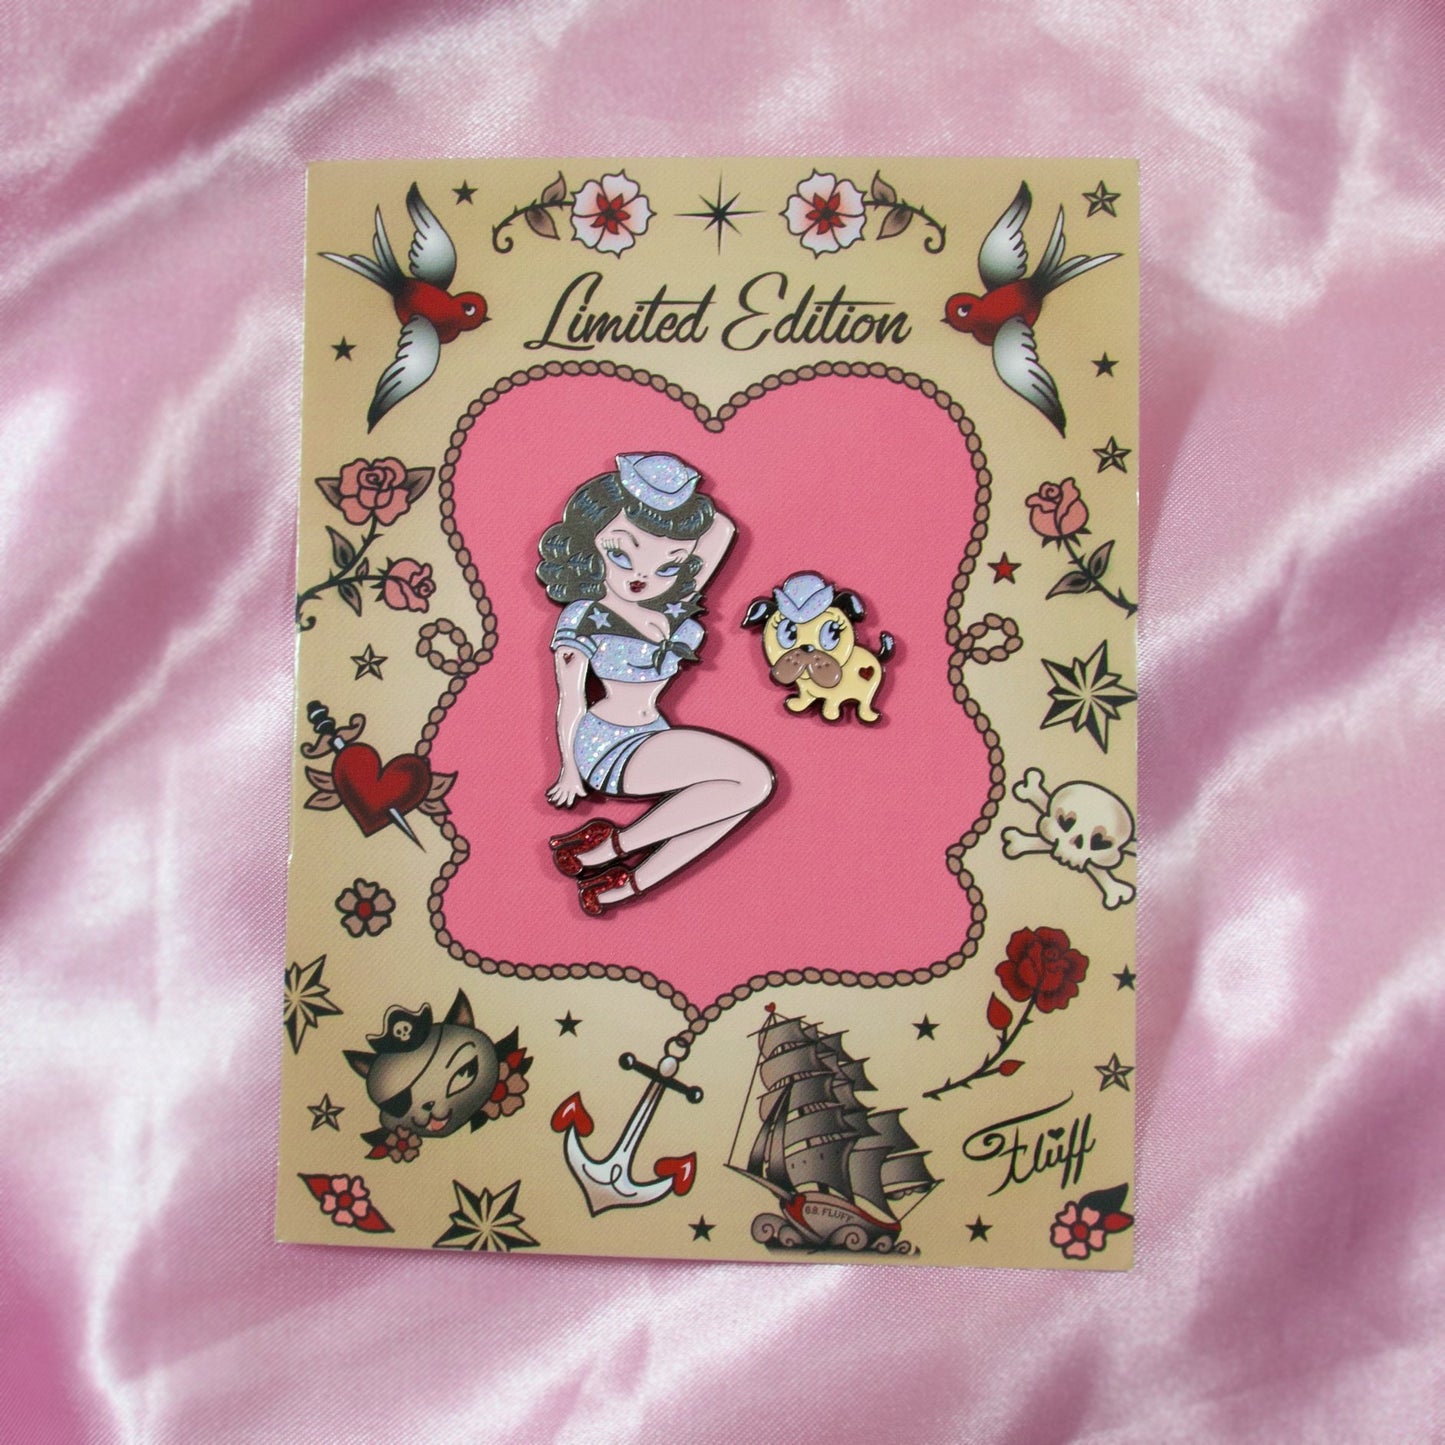 Suzy Sailor and Monty Enamel Pin Set •  Limited Edition